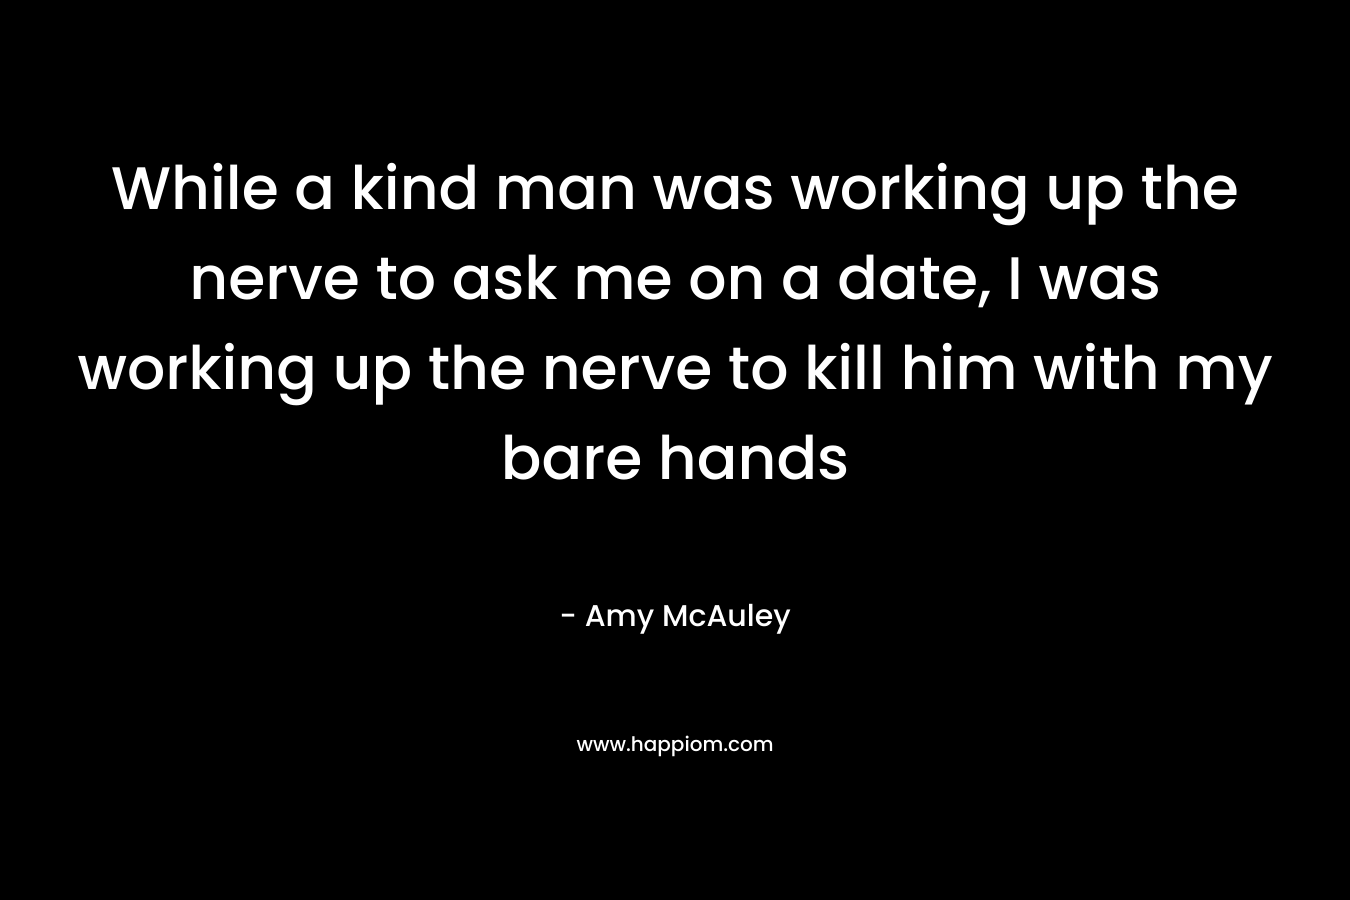 While a kind man was working up the nerve to ask me on a date, I was working up the nerve to kill him with my bare hands – Amy McAuley